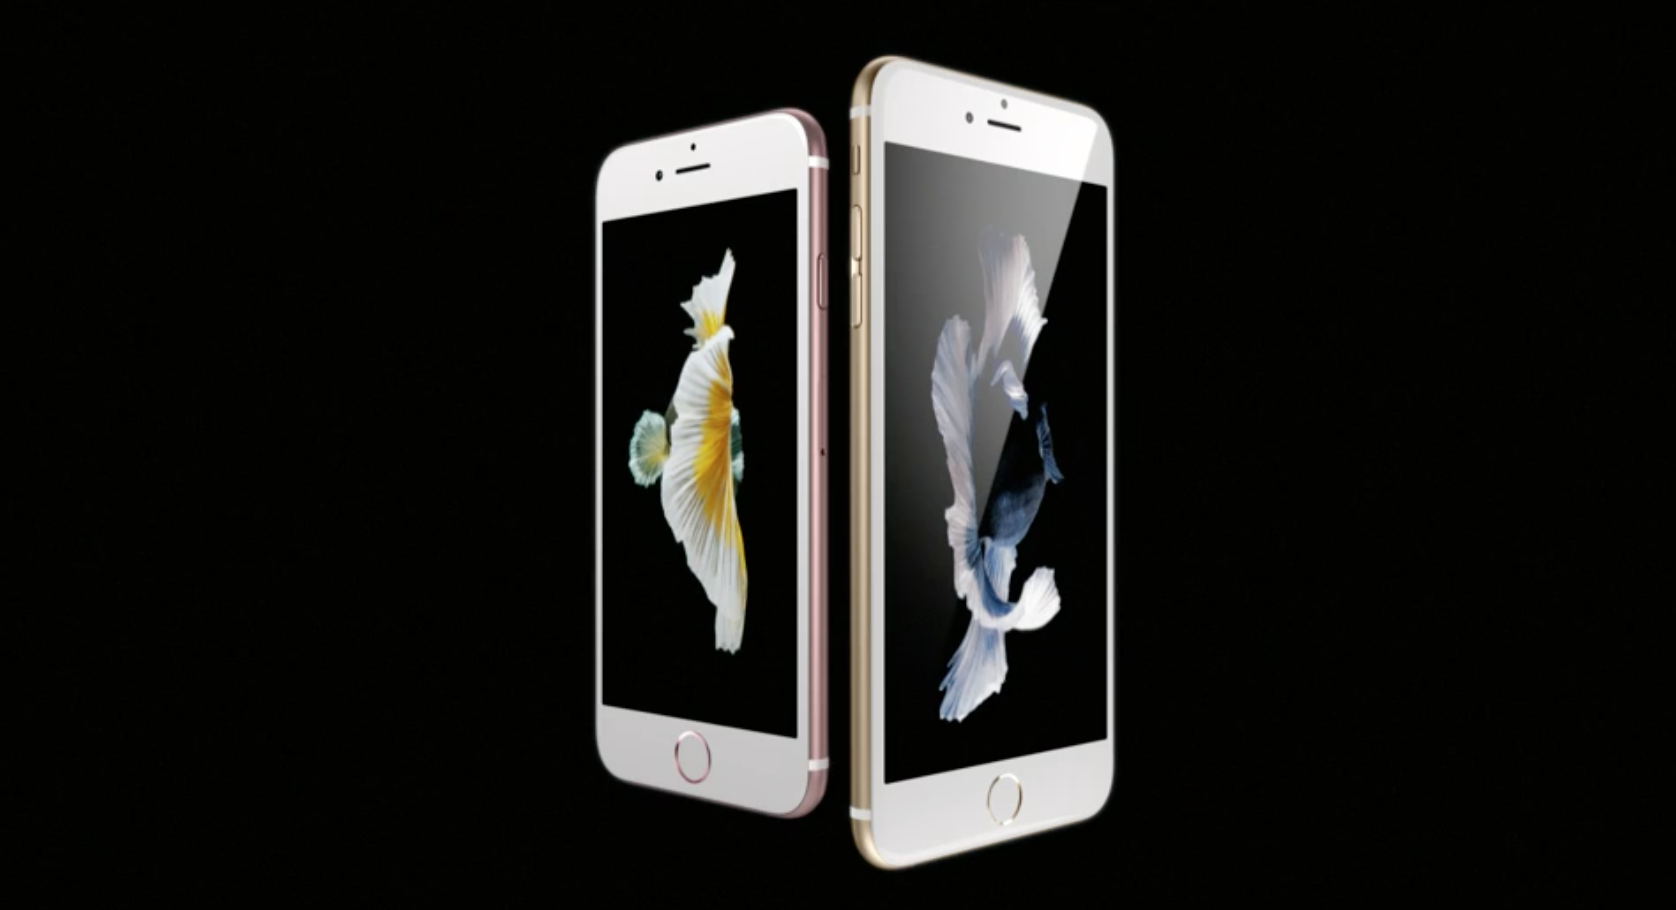 Apple Announces New iPhone 6S and 6S Plus Smartphones At Fall 2015 Event